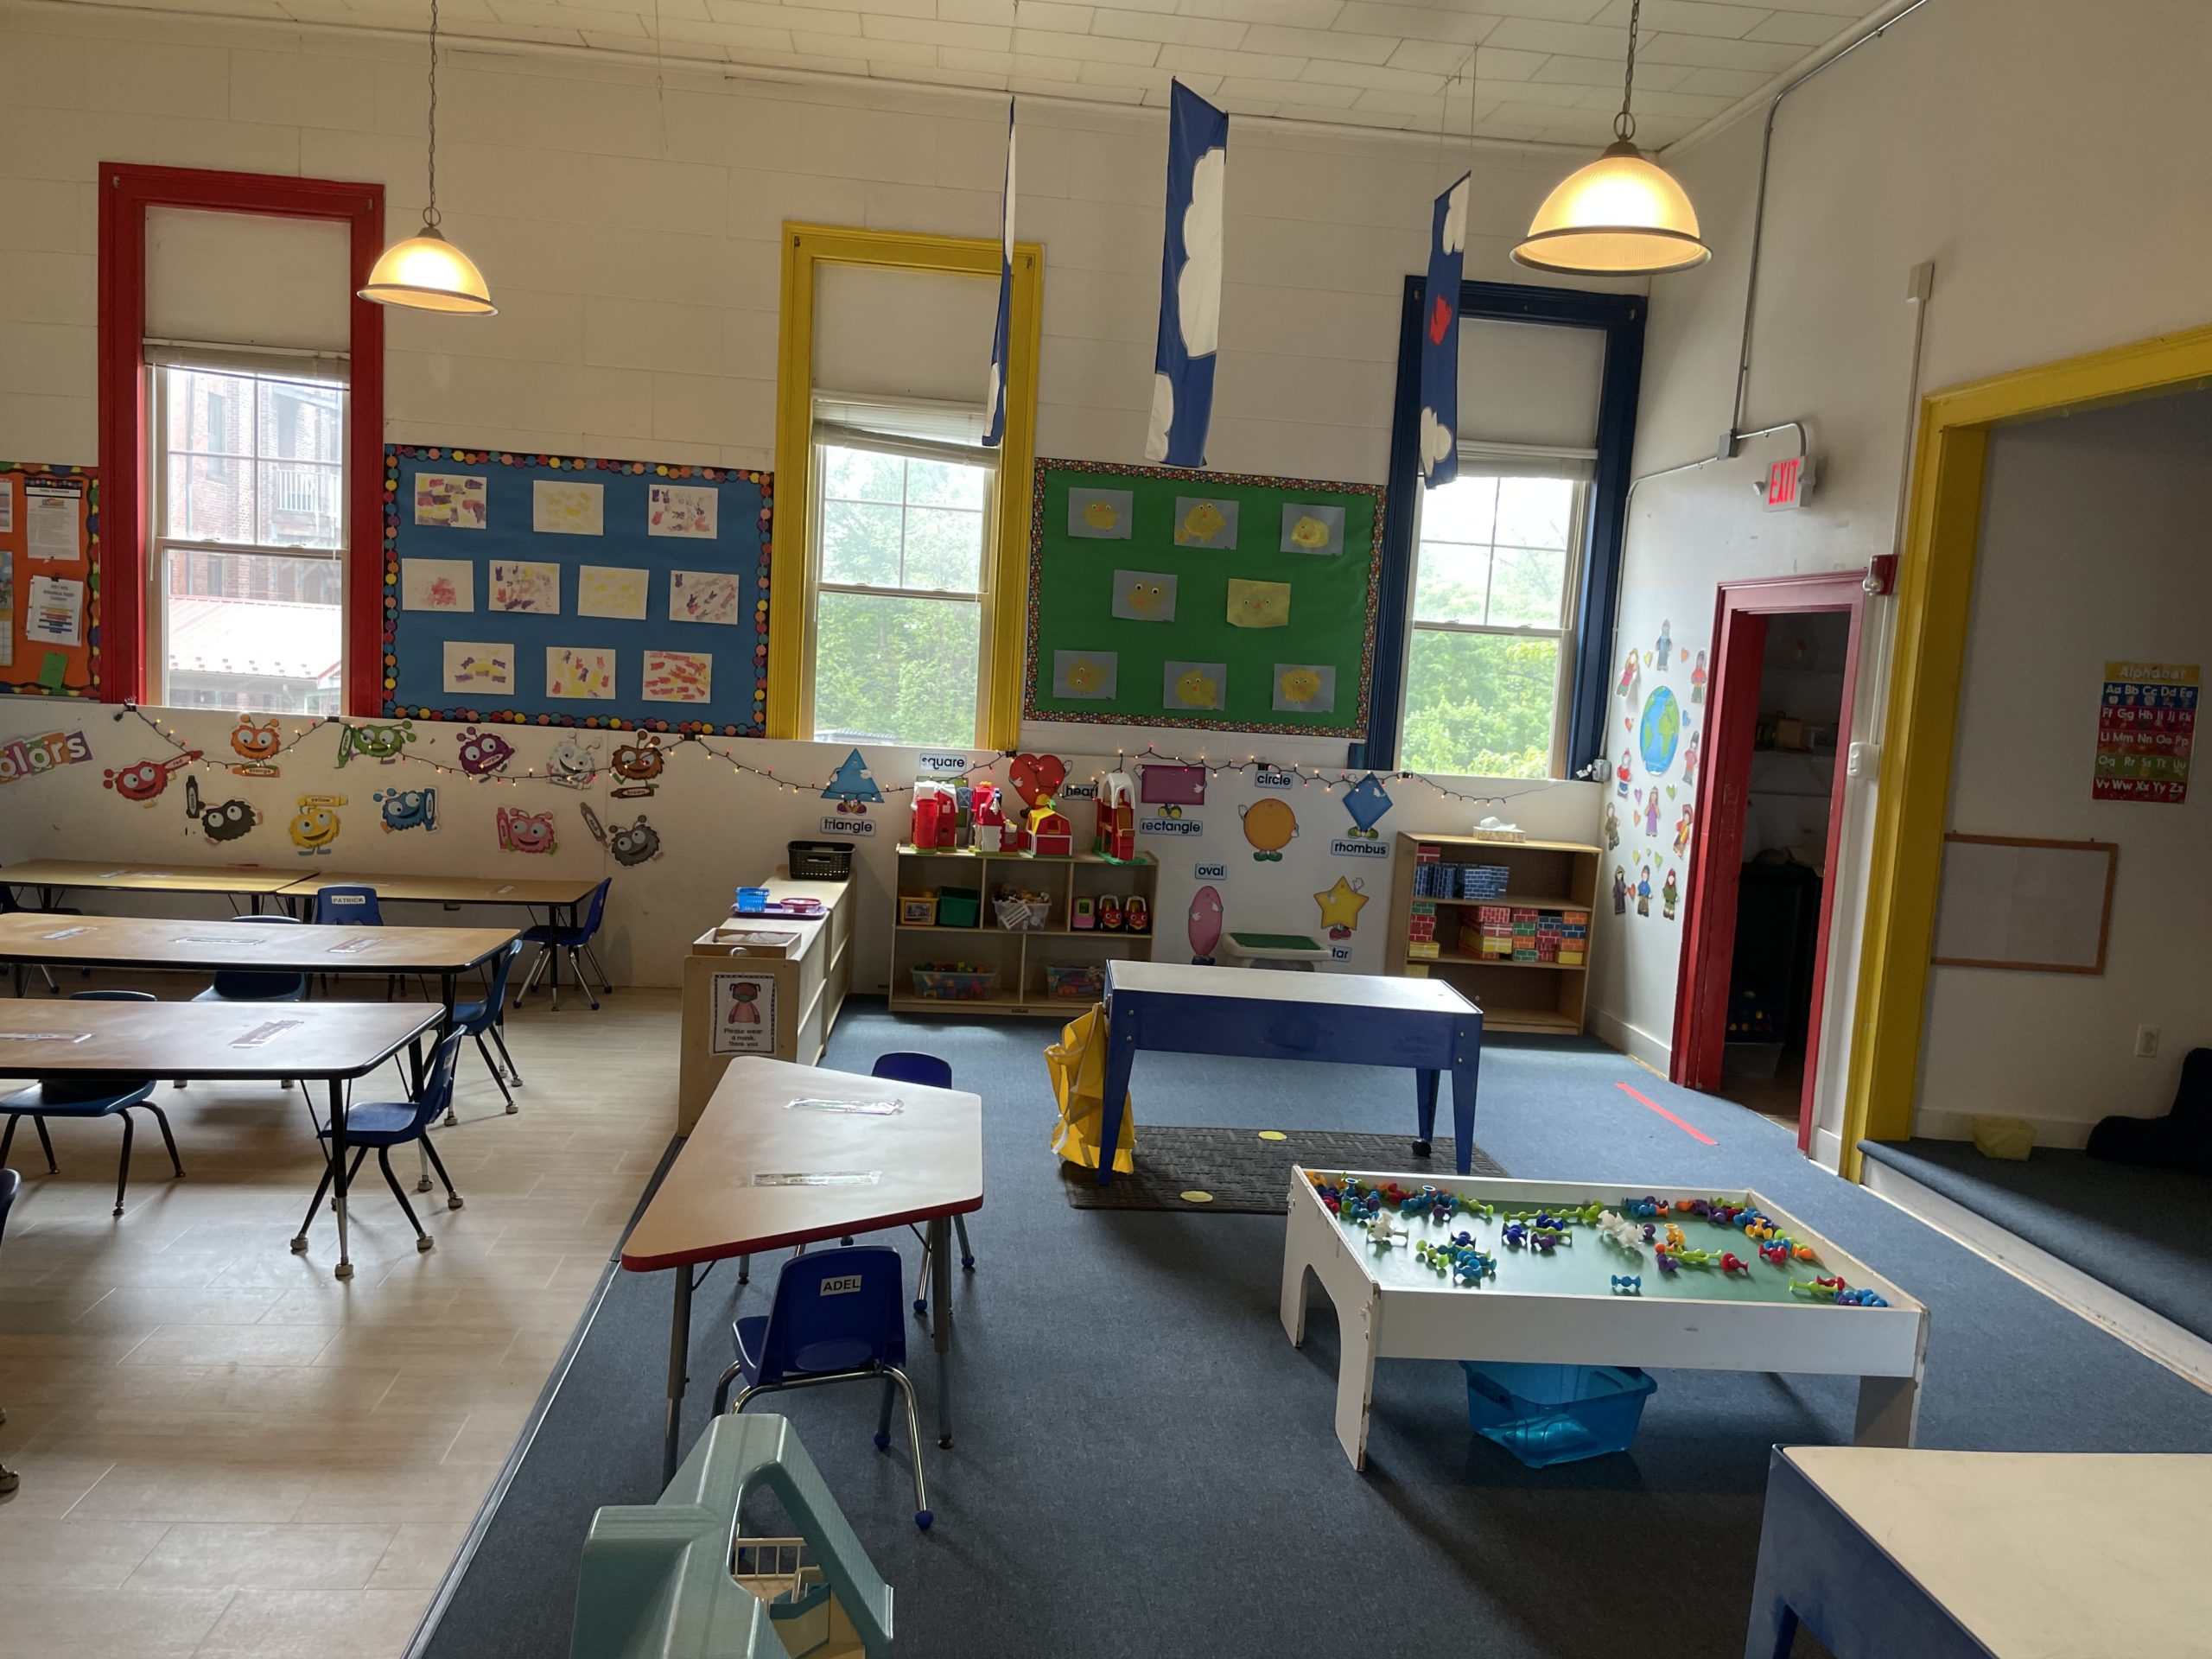 preschool classroom with desks and activities featuring colorful student artwork on walls